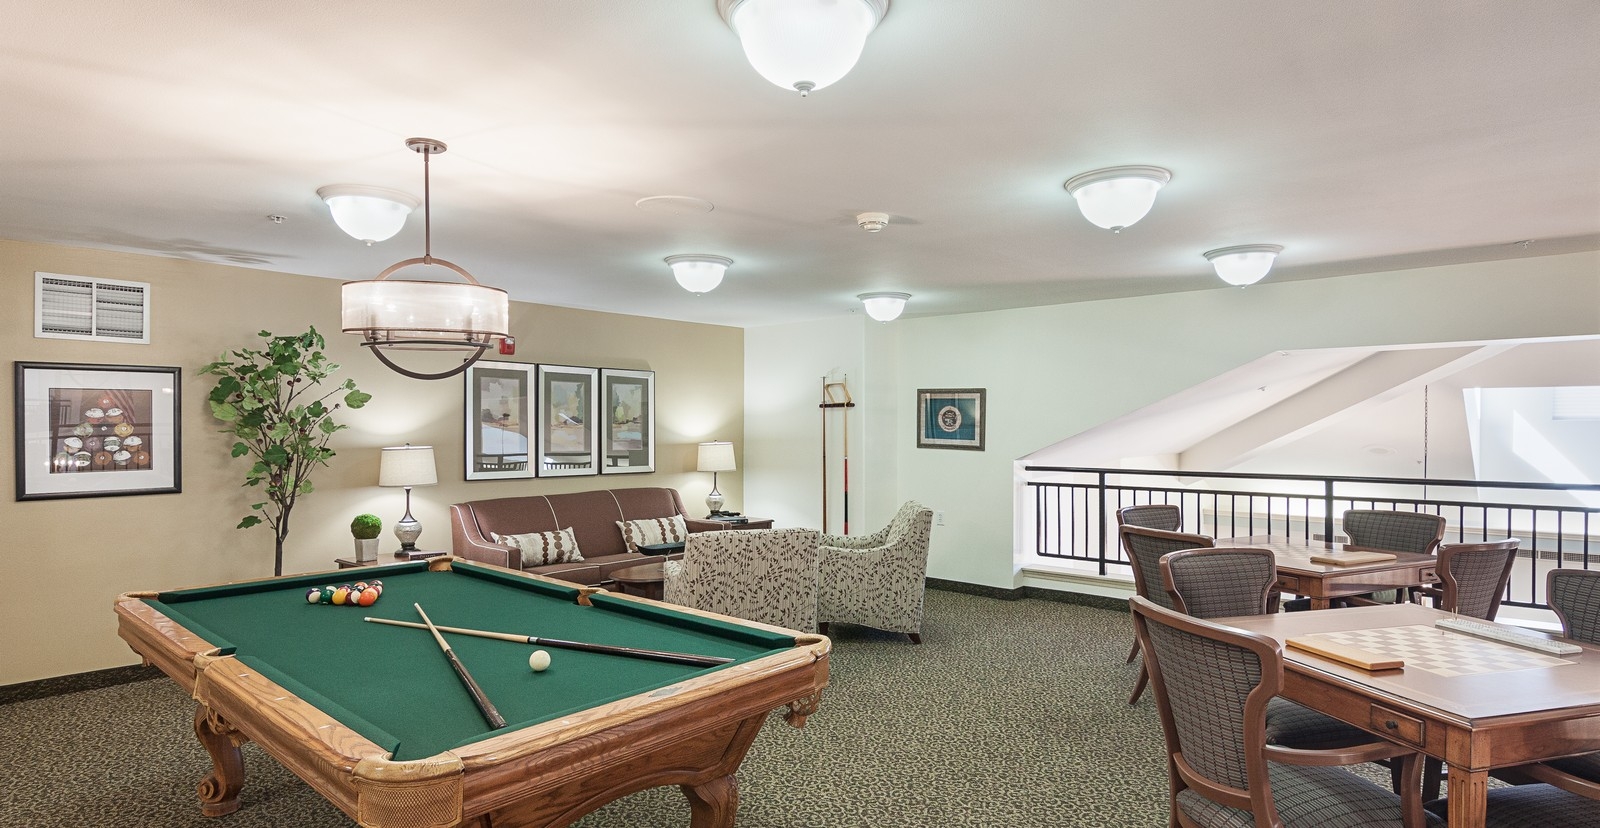 The Lodge at White Bear, A Sky Active Living Community image